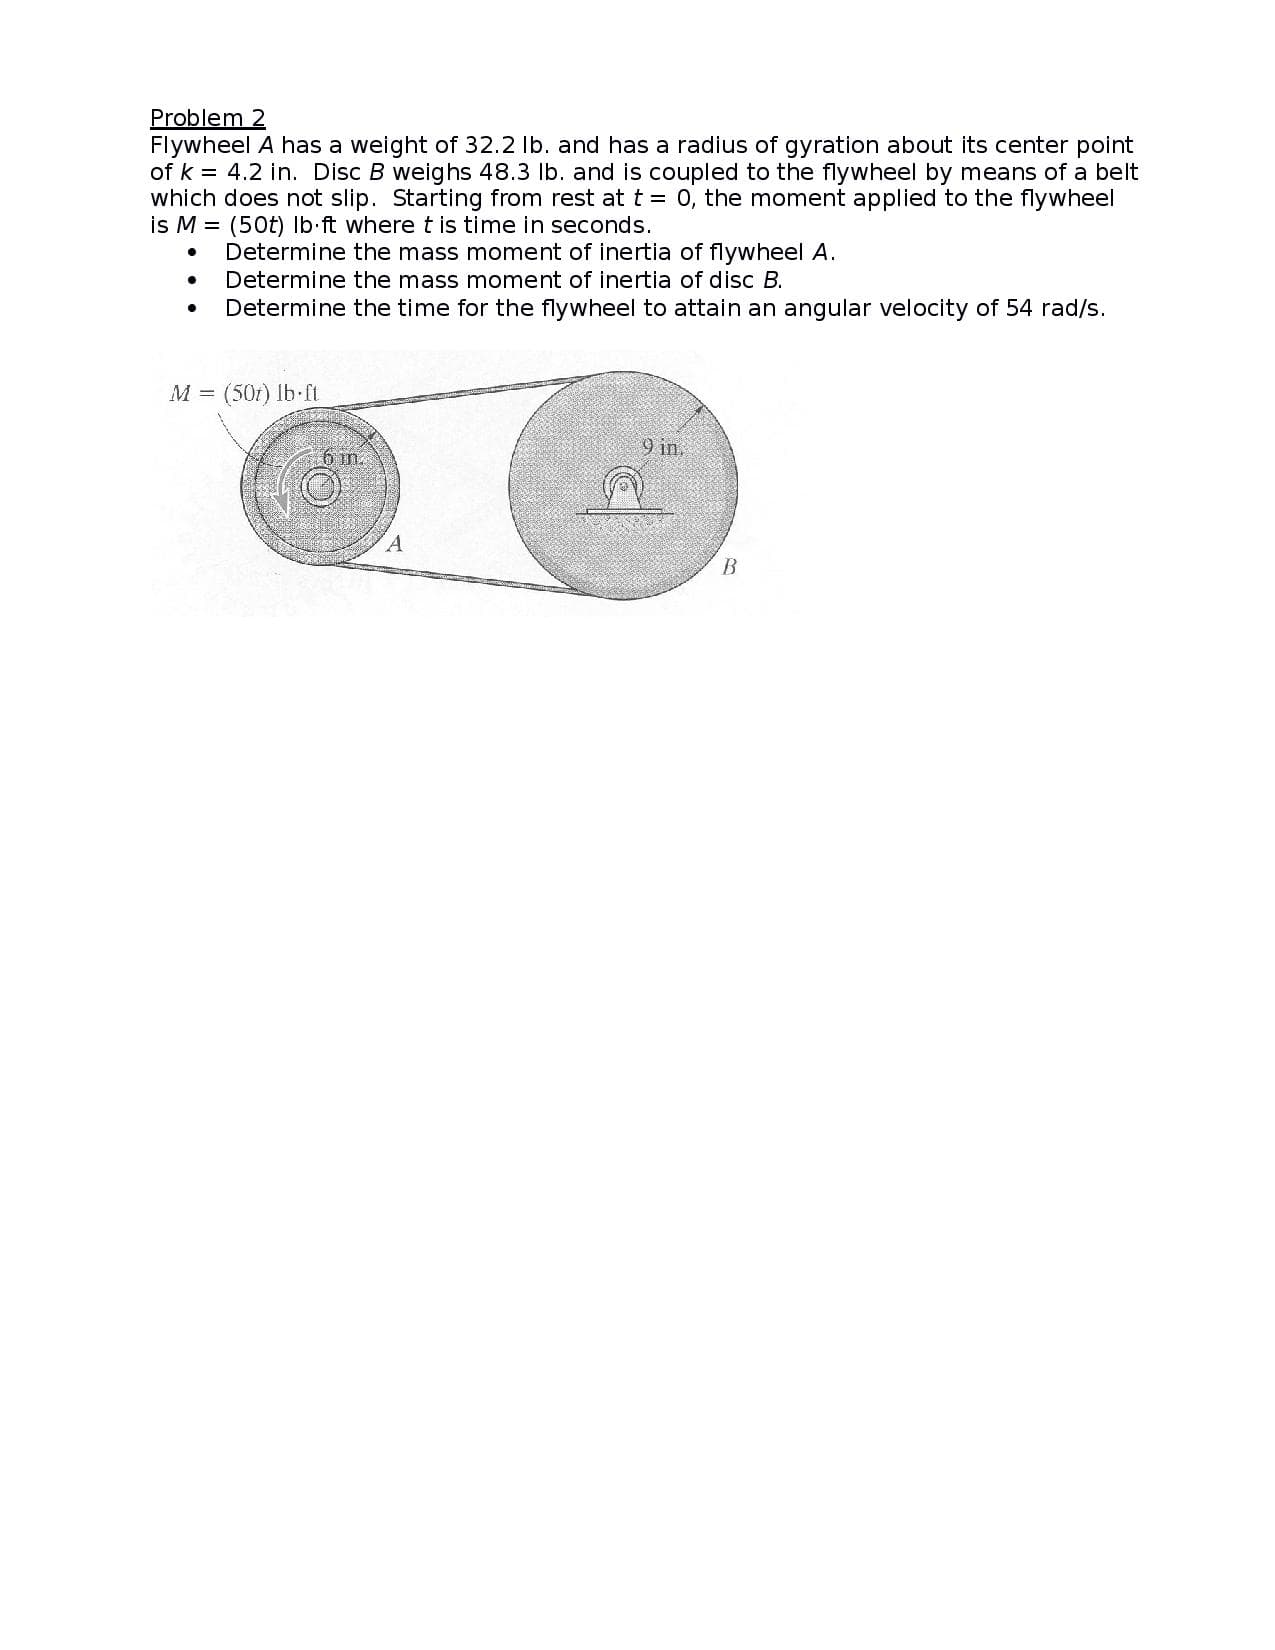 Problem 2
Flywheel A has a weight of 32.2 lb. and has a radius of gyration about its center point
of k = 4.2 in. Disc B weighs 48.3 lb. and is coupled to the flywheel by means of a belt
which does not slip. Starting from rest at t = 0, the moment applied to the flywheel
is M = (50t) lb ft where t is time in seconds.
Determine the mass moment of inertia of flywheel A.
Determine the mass moment of inertia of disc B.
Determine the time for the flywheel to attain an angular velocity of 54 rad/s.
M = (50t) lb ft
9 in.
A.
